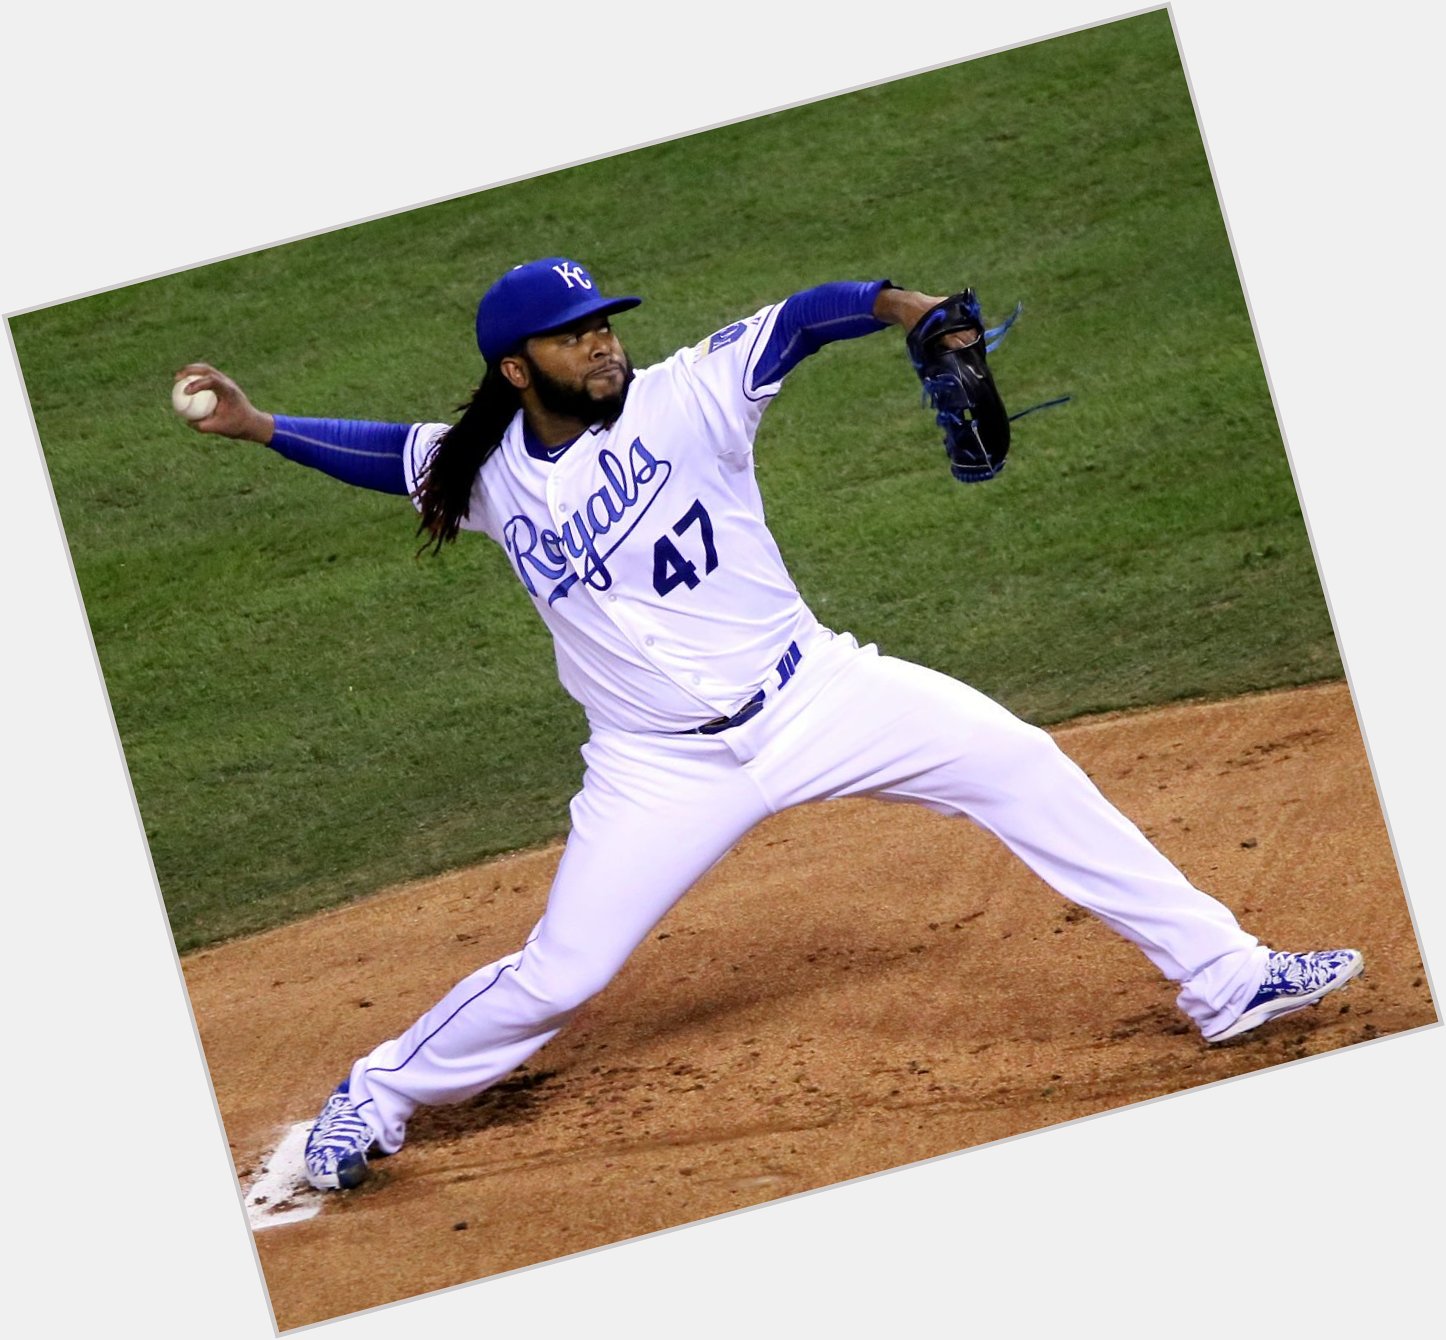 Happy Birthday to former Kansas City Royals player Johnny Cueto(2015), who turns 32 today! 